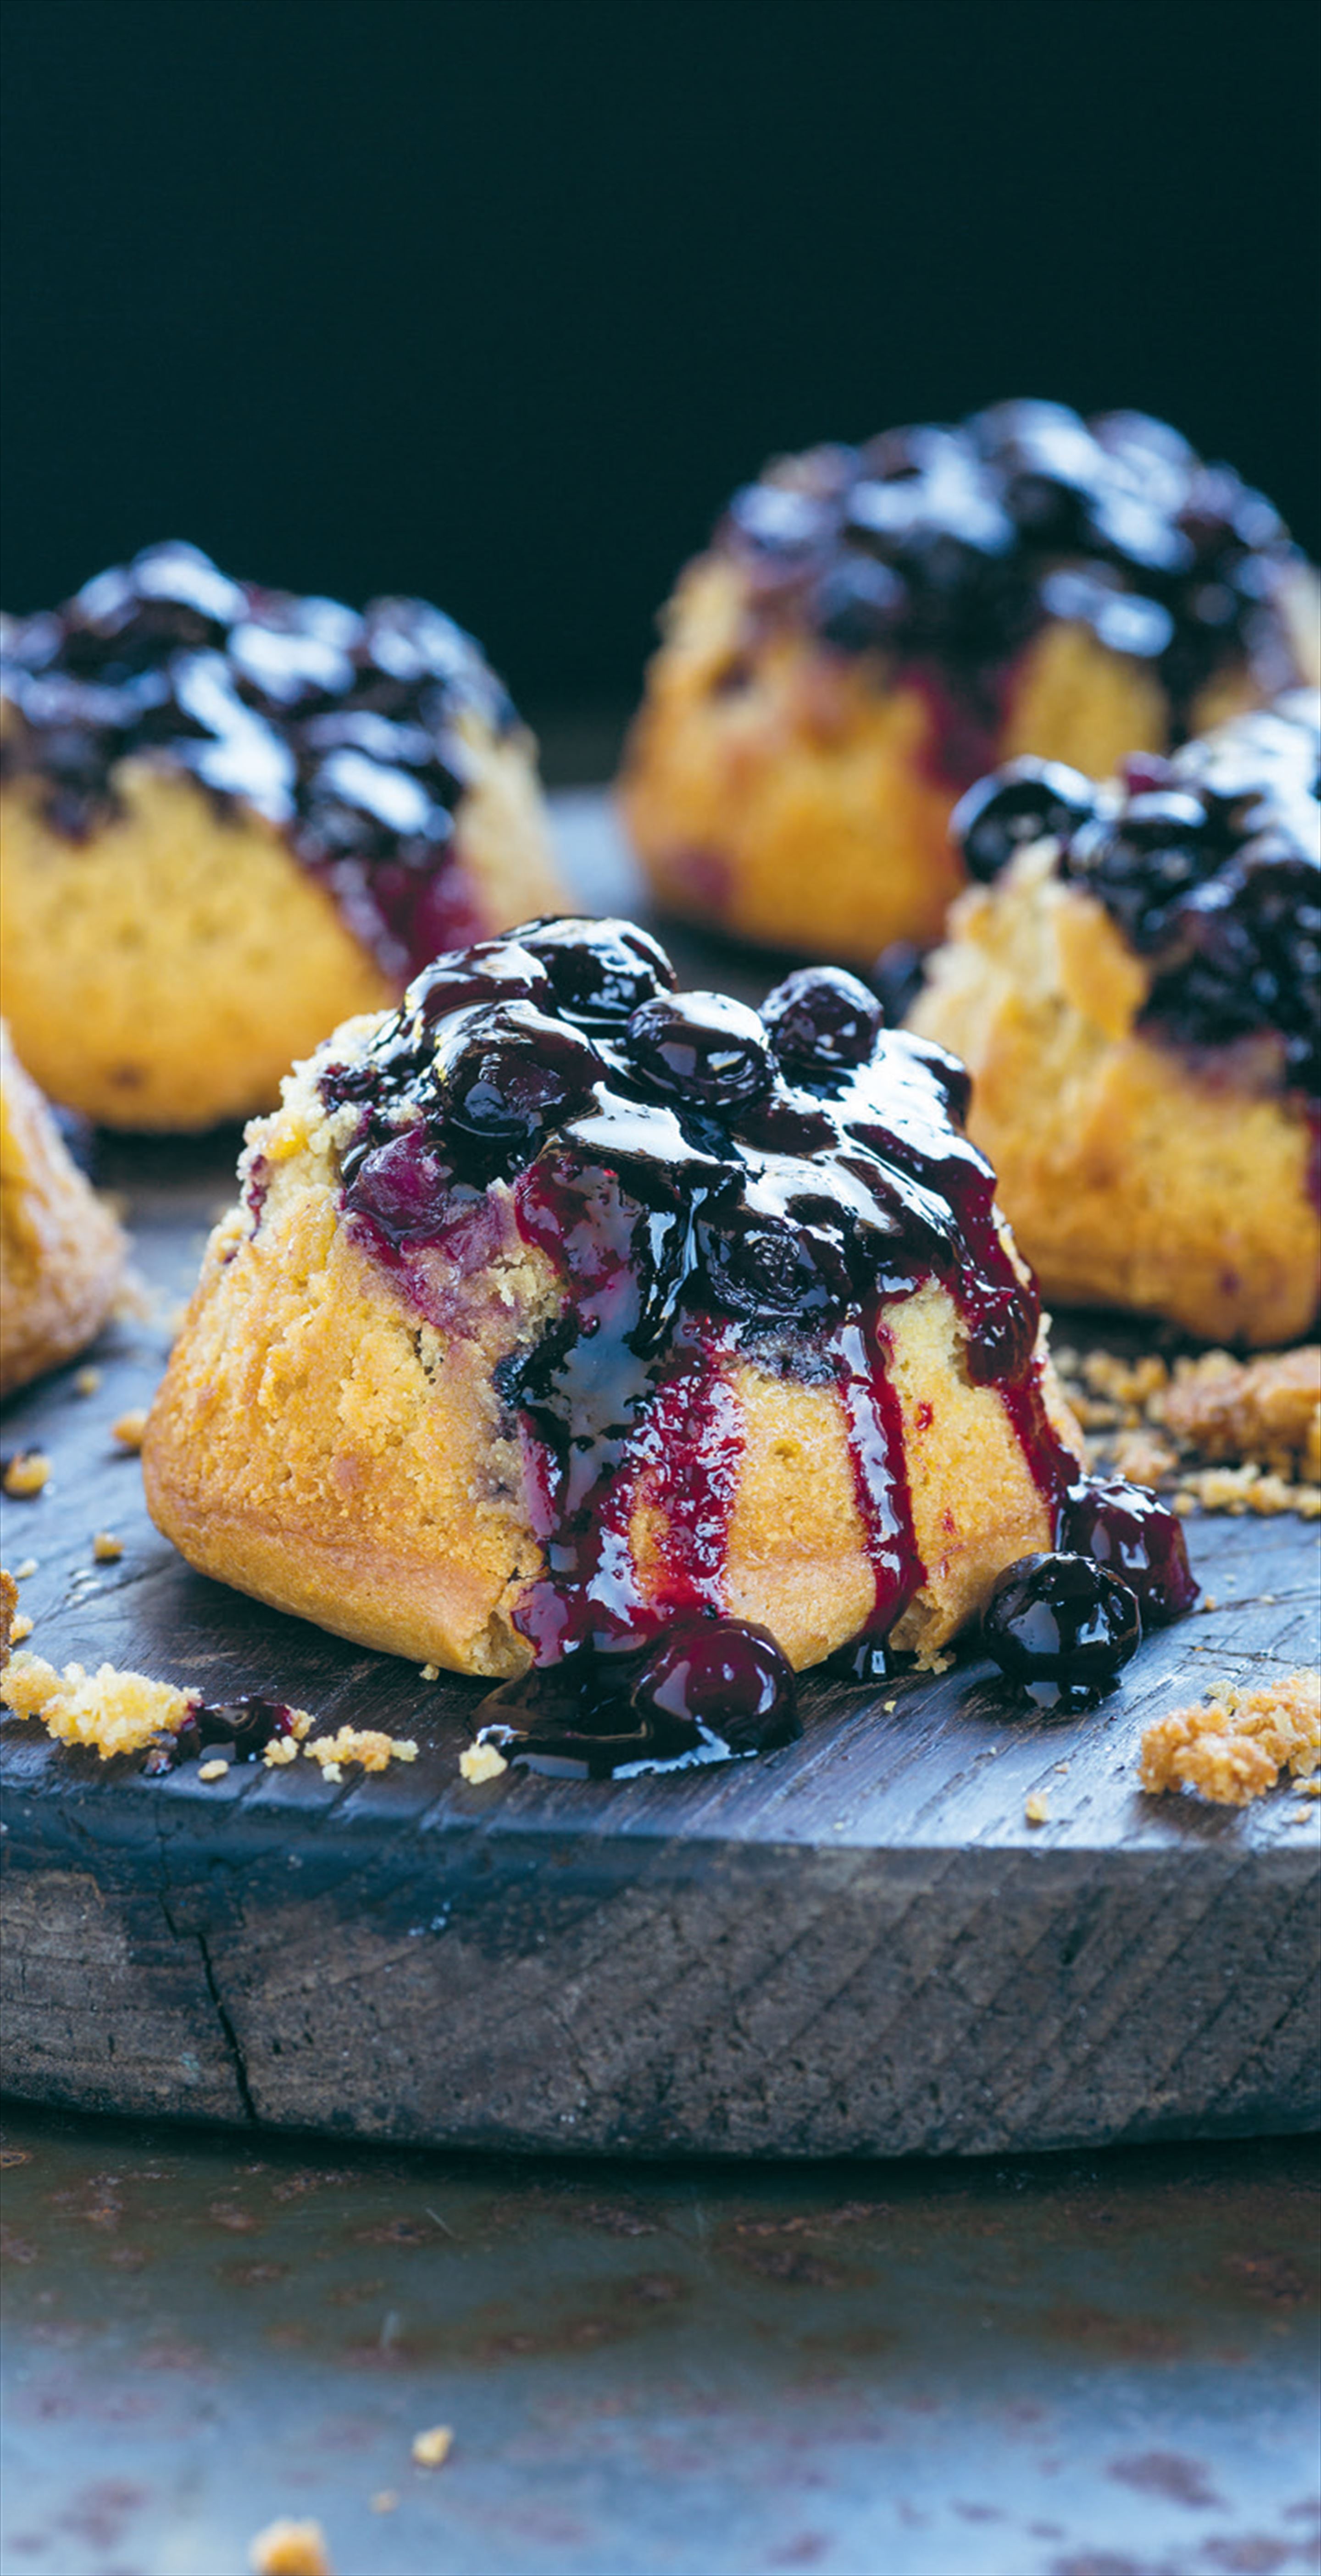 Warm Mexican corn & blueberry puddings